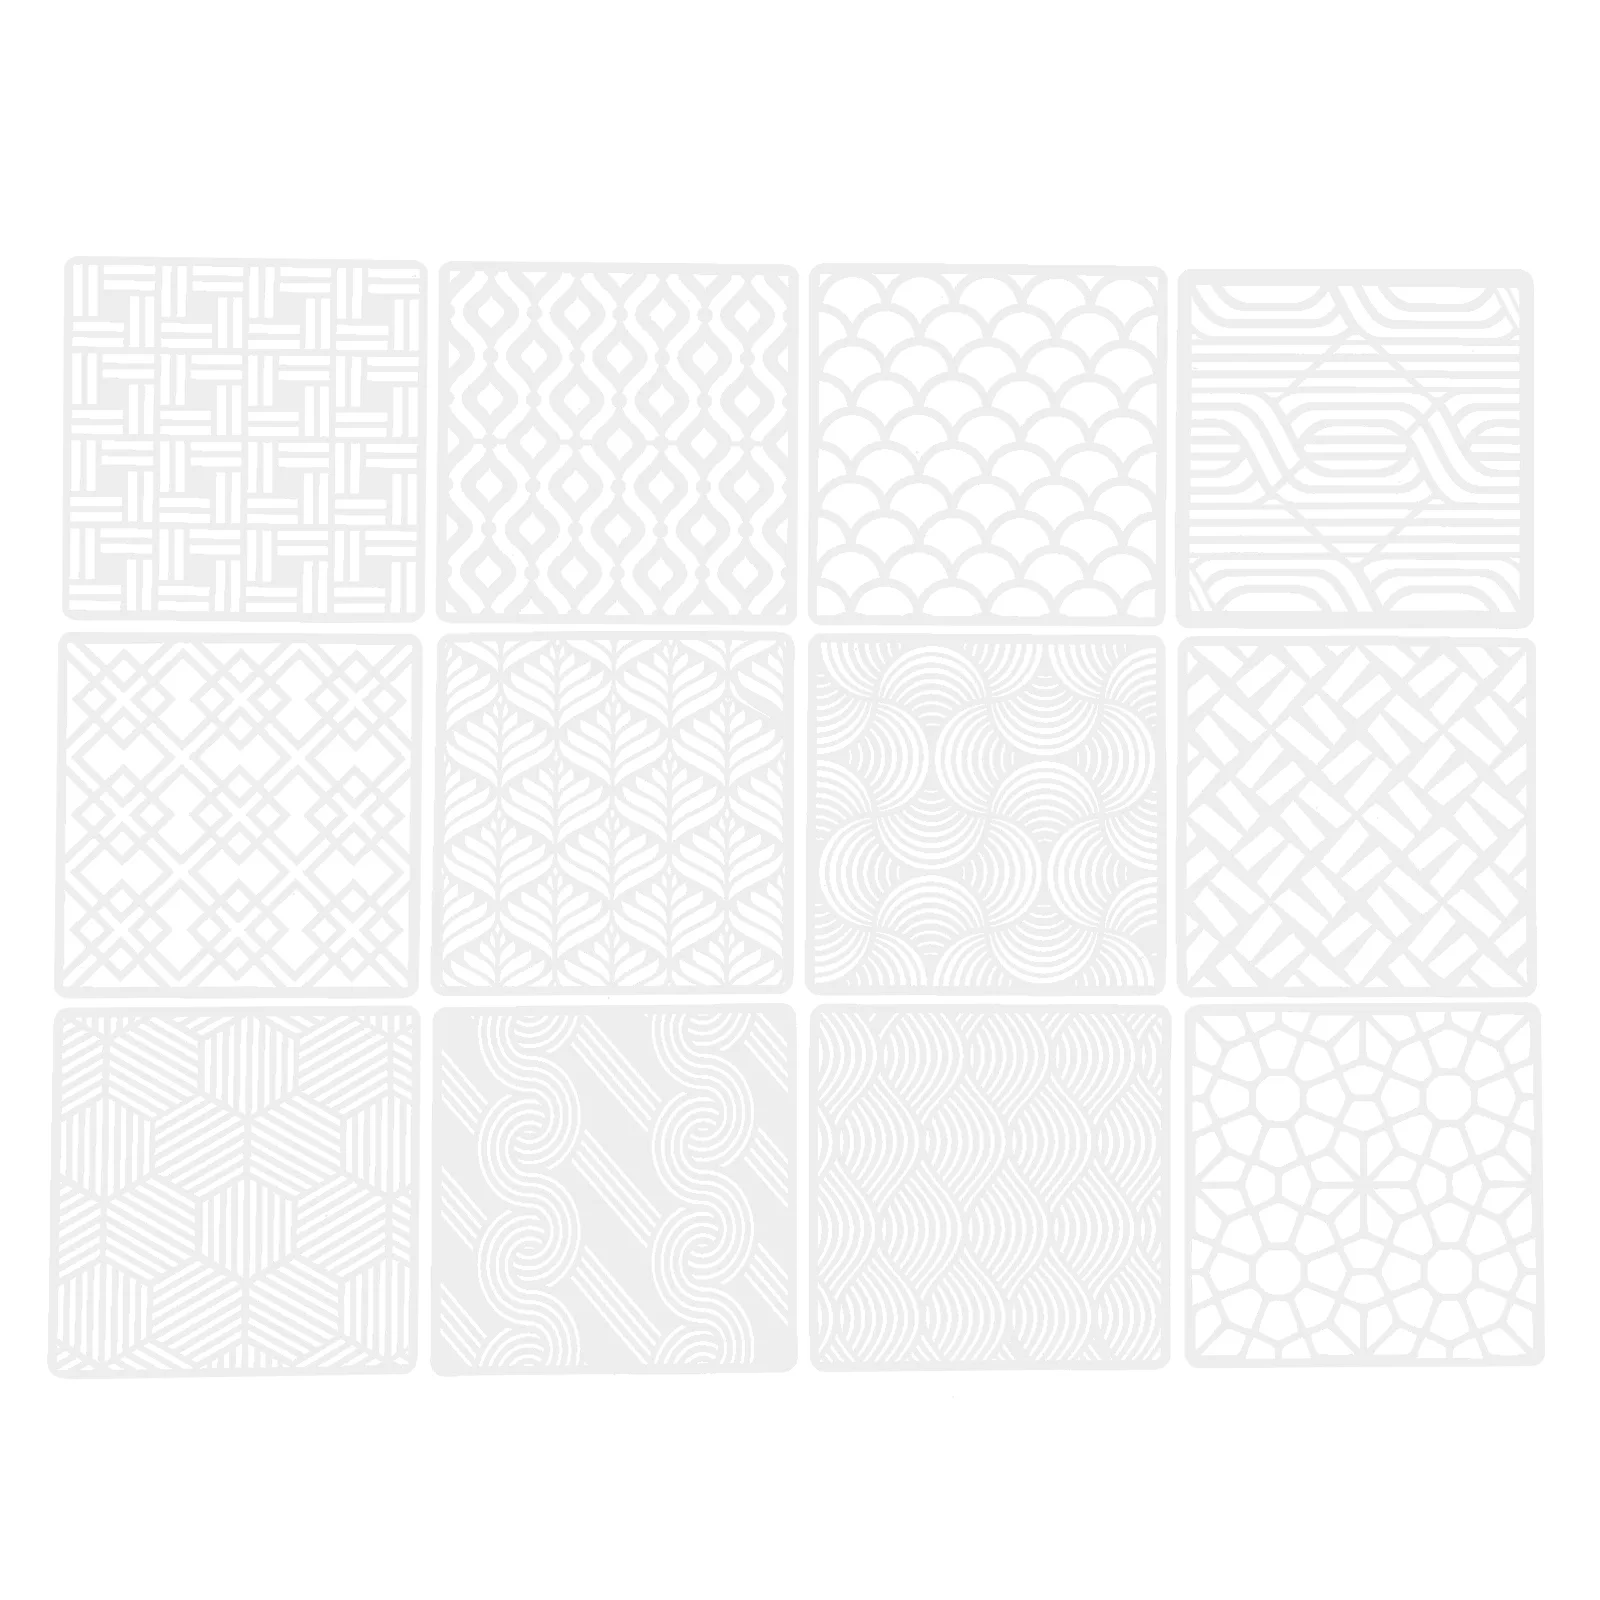 

12 Pcs Geometric Drawing Template Geometry Stencil Stencils Decor Large Size Wall Painting DIY Craft Hollow Out Templates